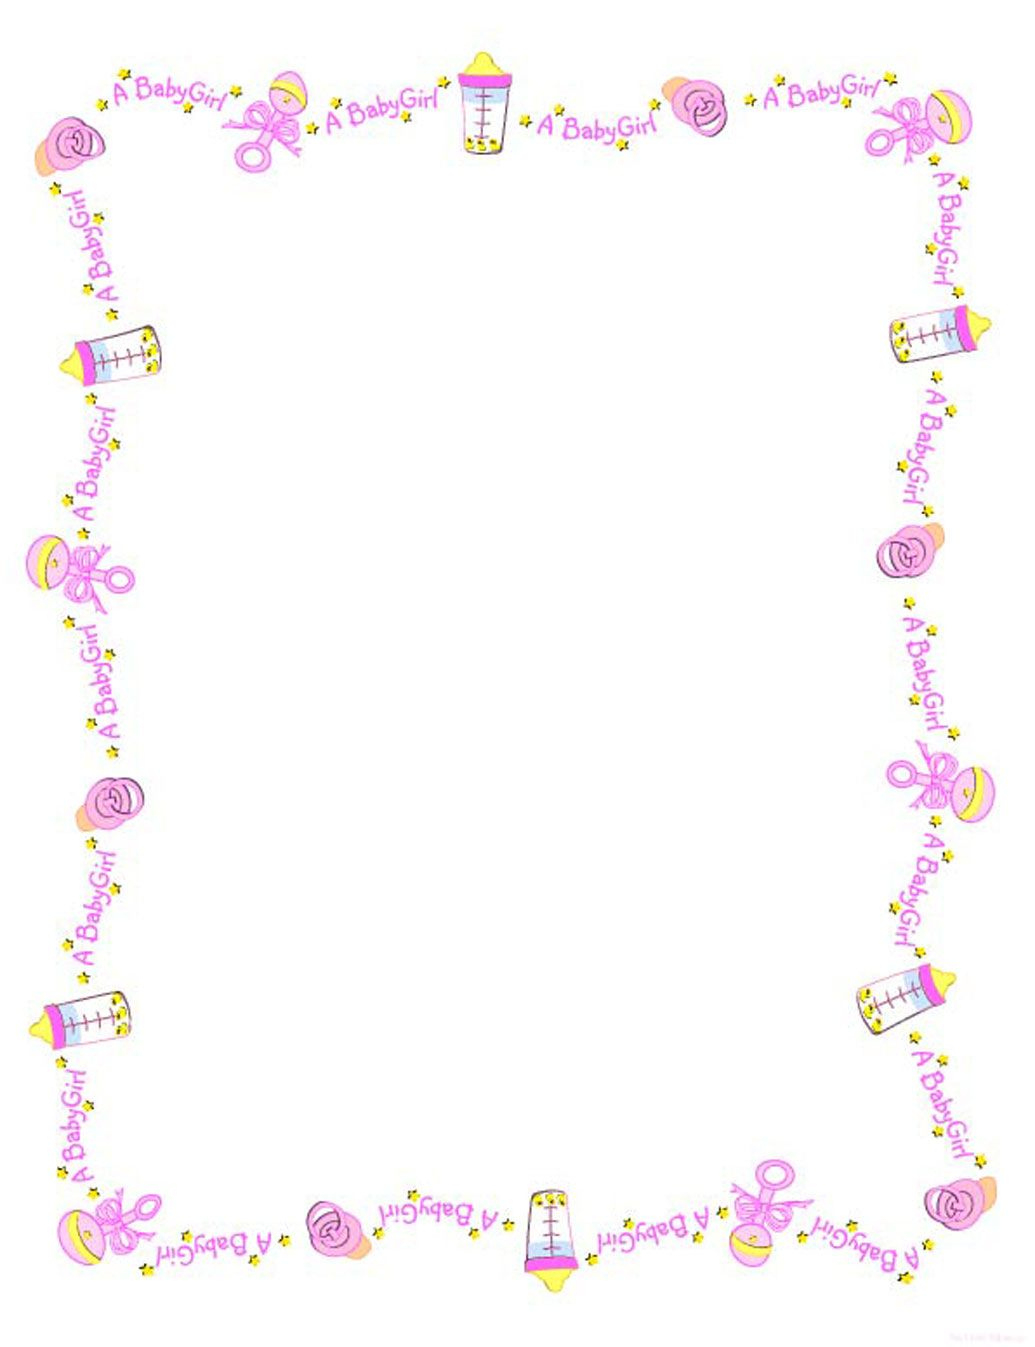 Baby Girl Borders Clipart | Baby Girl Border, Welcome Baby Girls intended for Free Printable Baby Borders For Paper